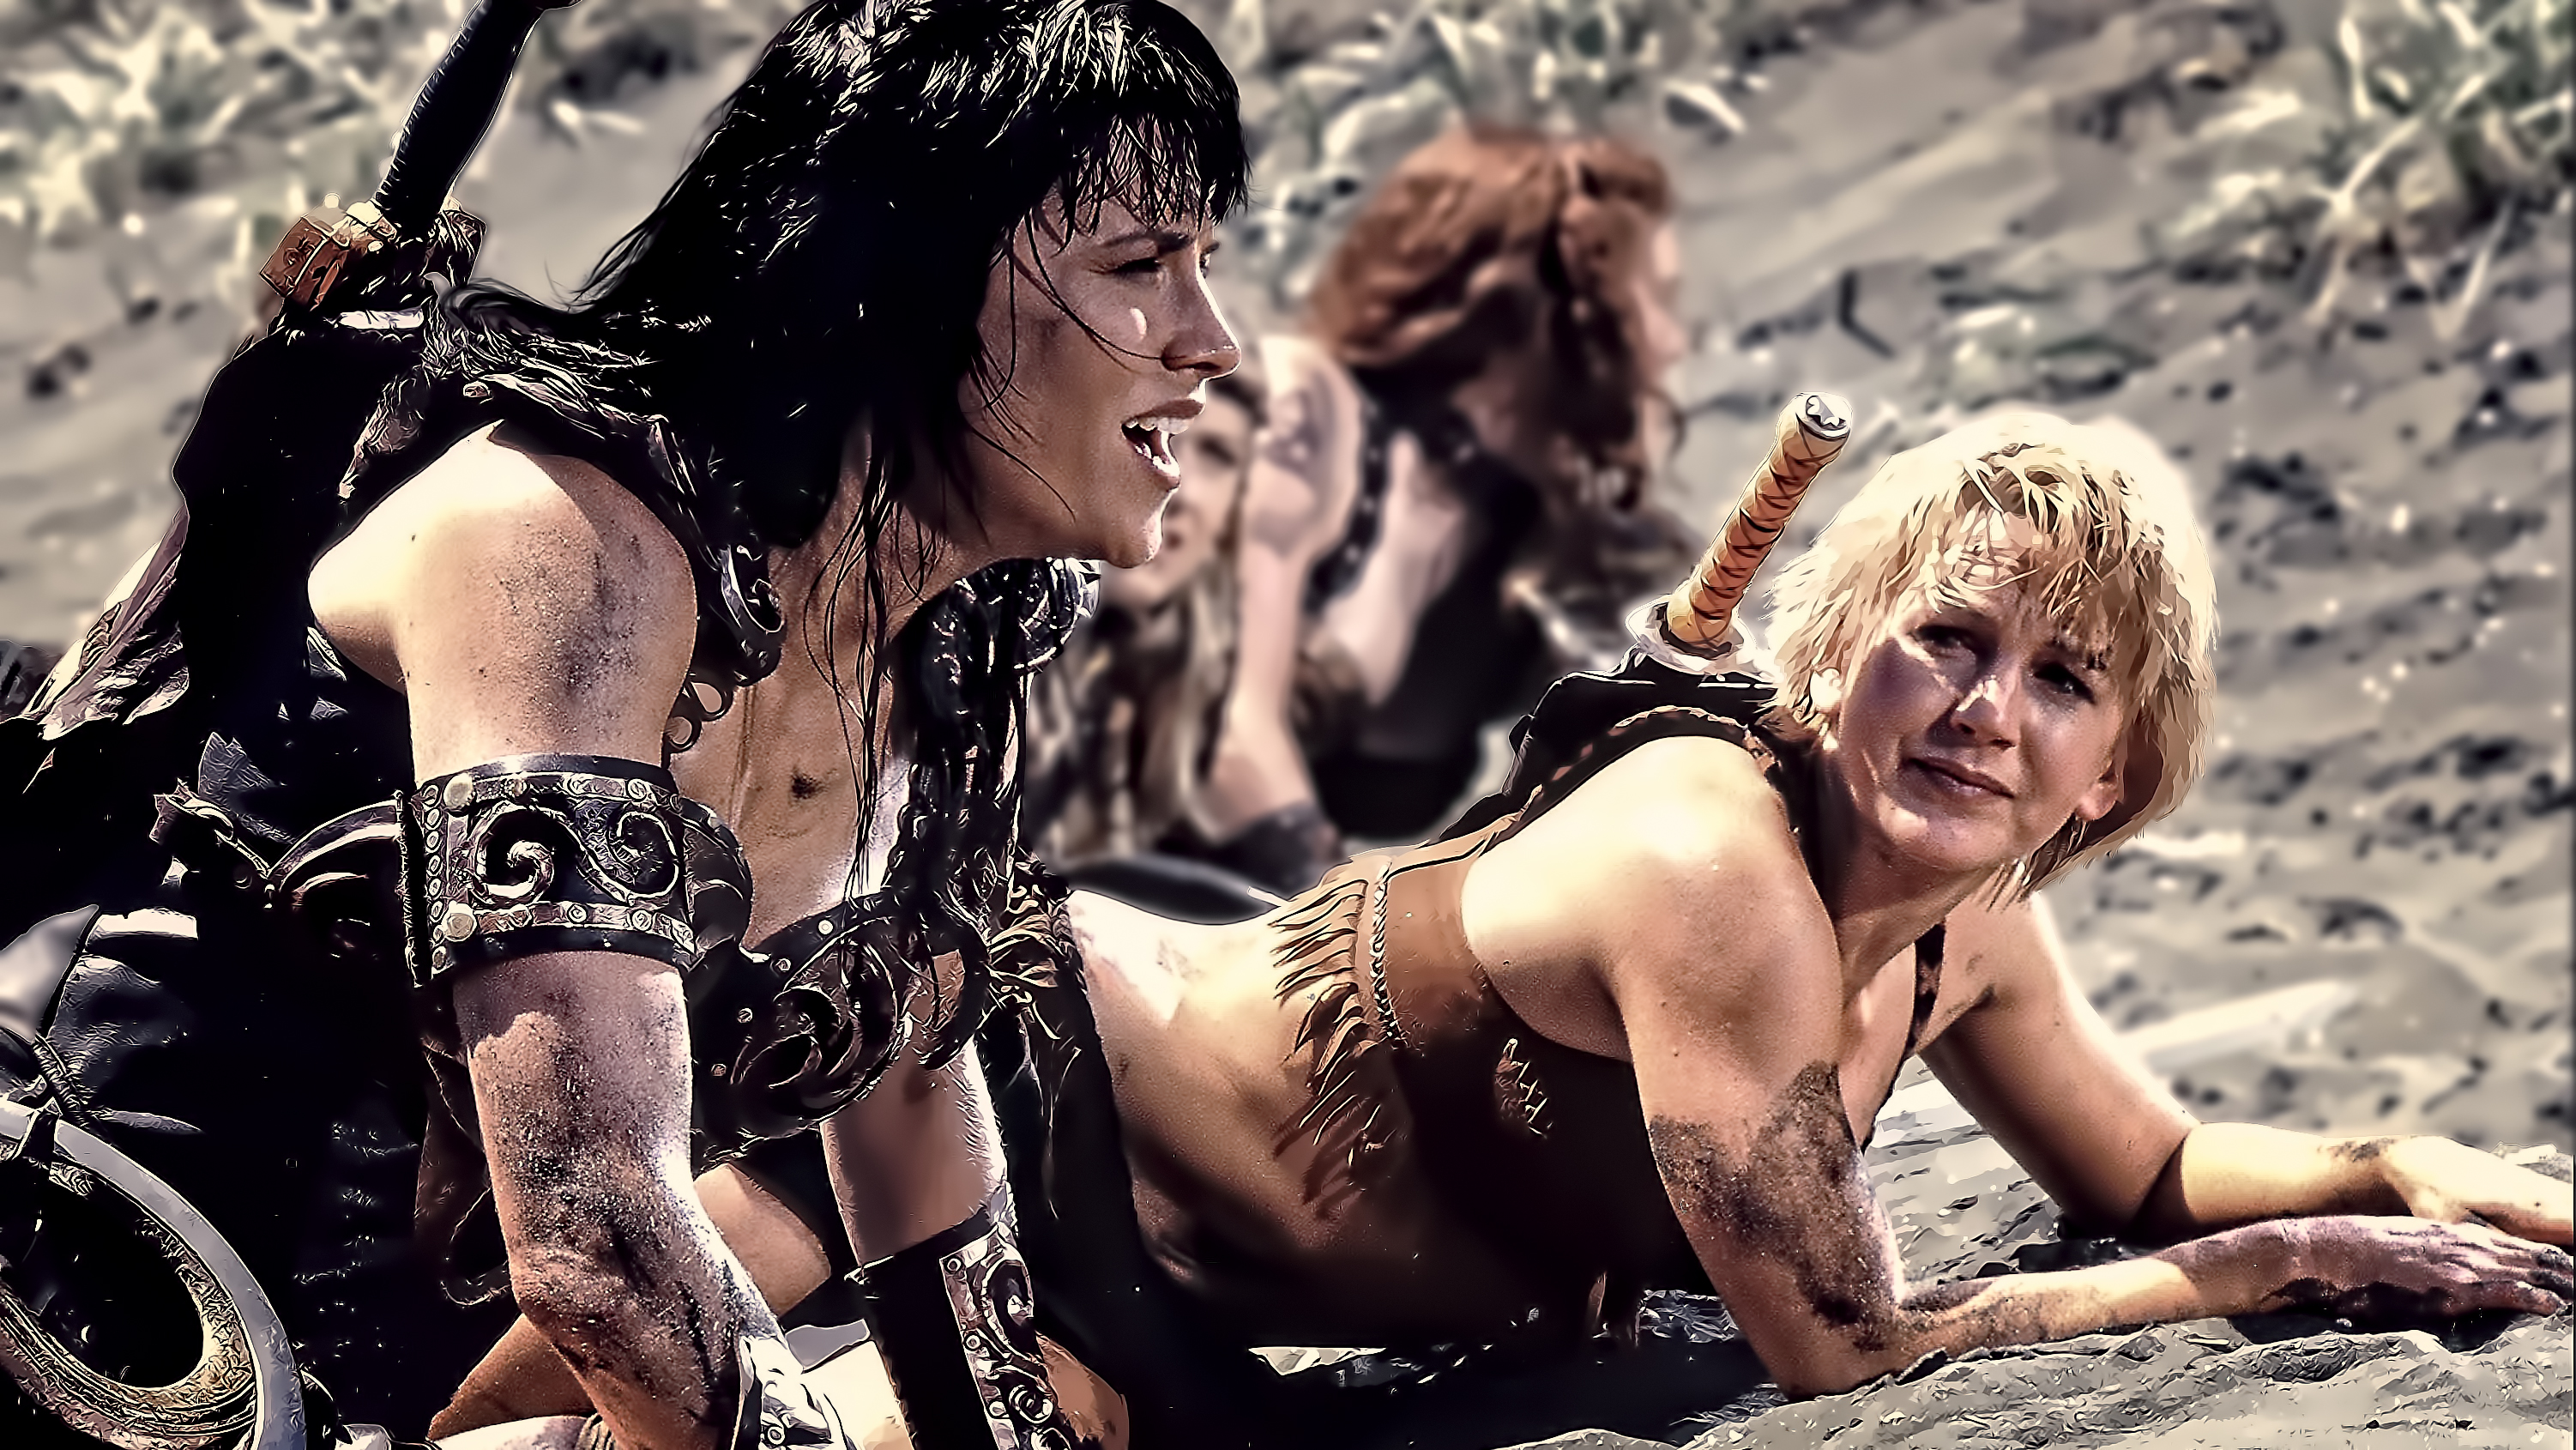 Xena Wallpapers